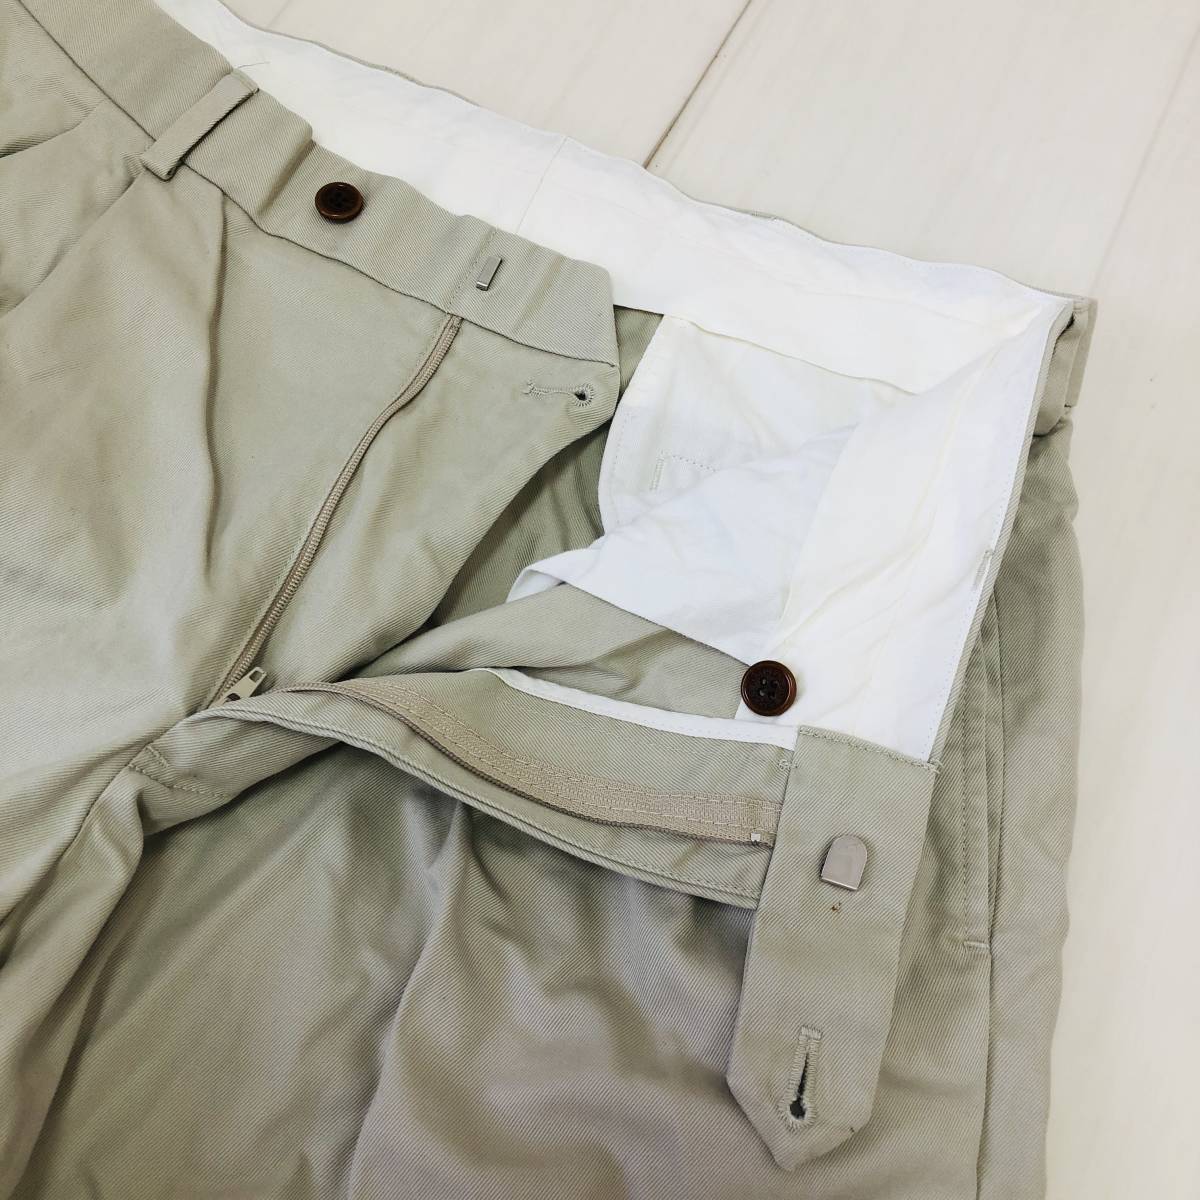 k2191 beautiful goods 346 BROOKS BROTHERS Brooks Brothers pants cotton 100% chinos W33 L30 beige Basic casual style 